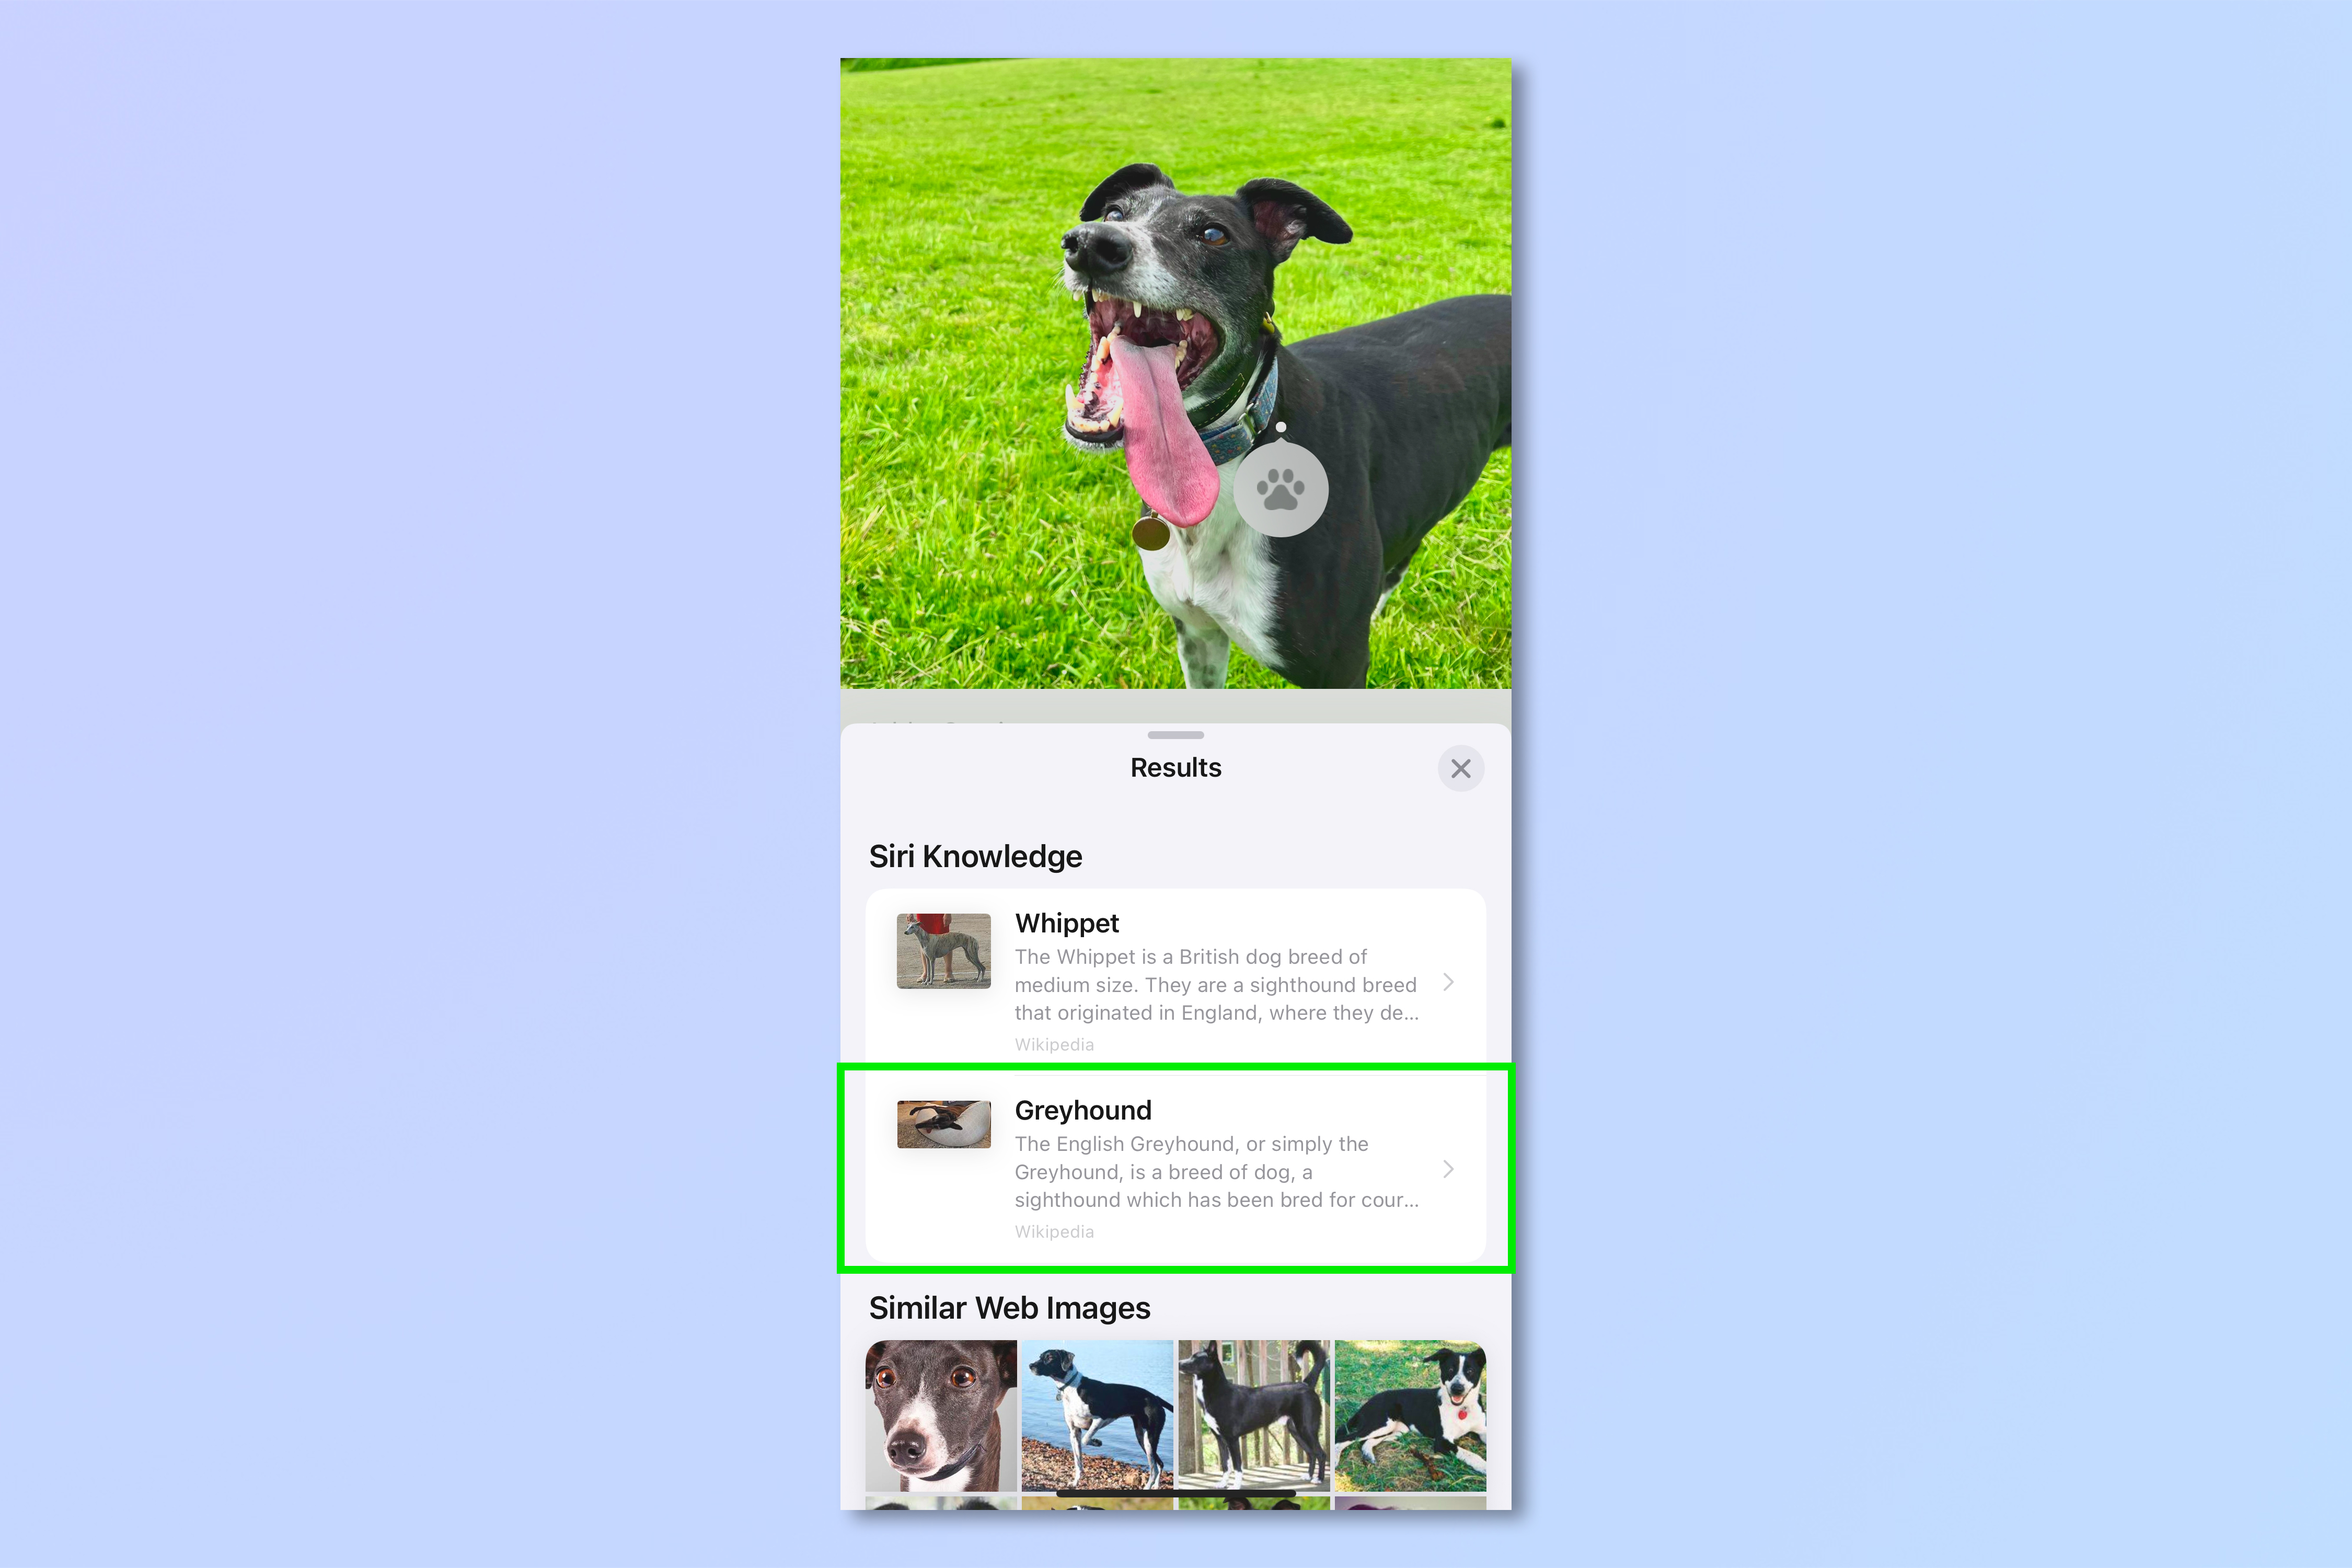 A screenshot showing the steps required to look up any dog ​​on iPhone